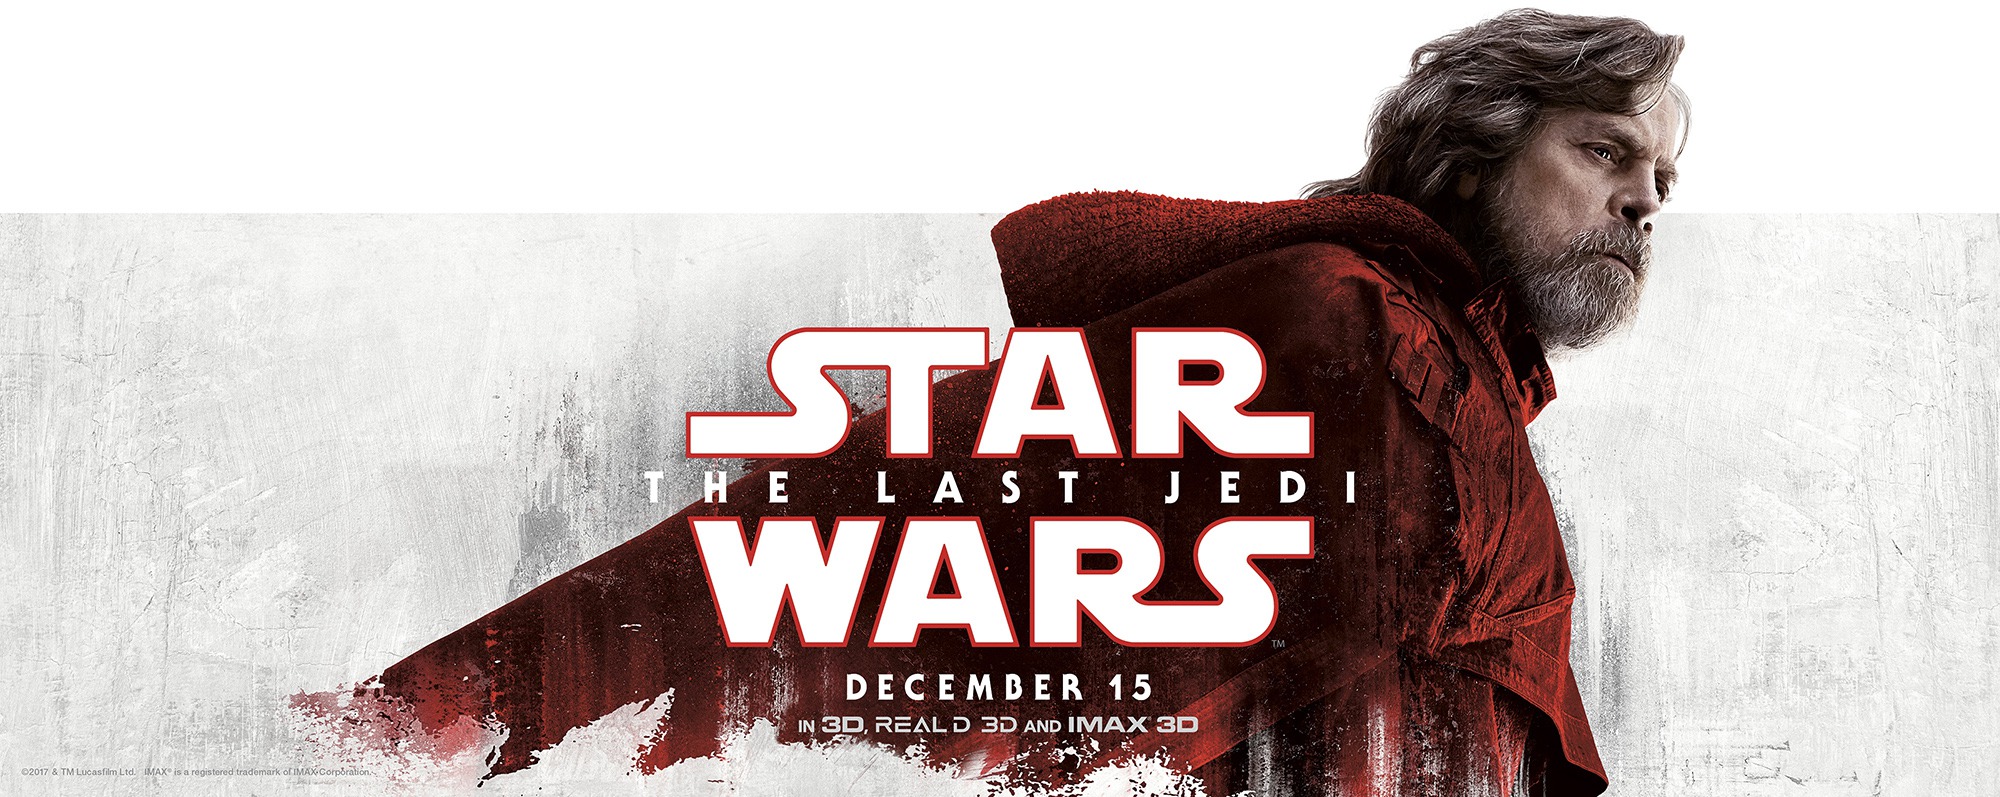 Mega Sized Movie Poster Image for Star Wars: The Last Jedi (#65 of 67)